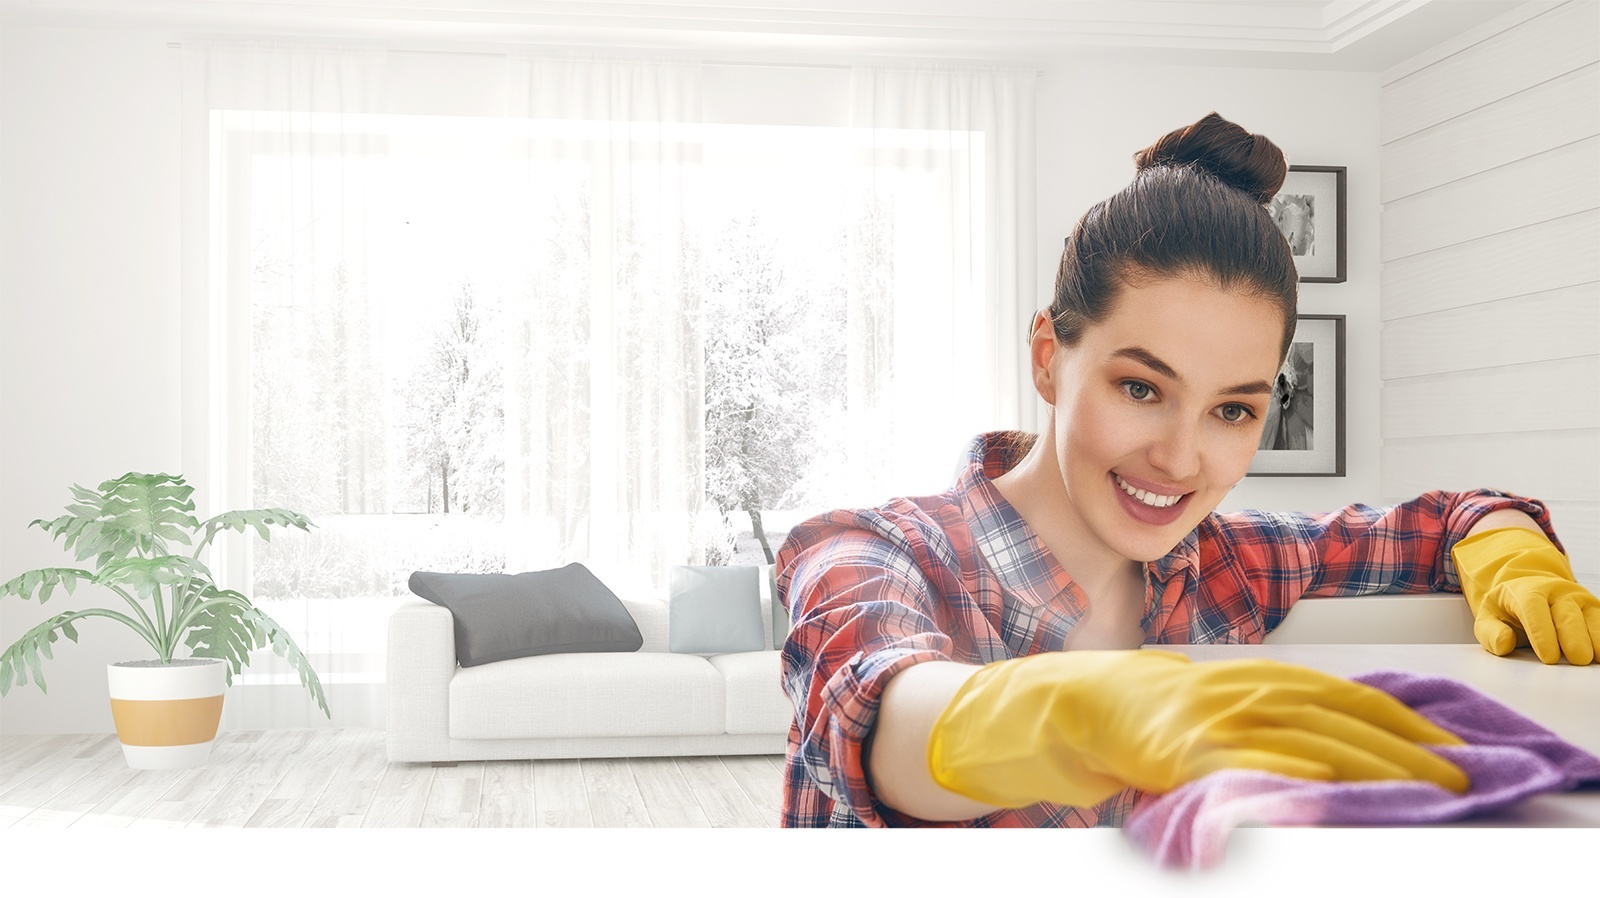 Professional and Reliable Cleaning Services for Residential and Commercial Customers in San Rafael